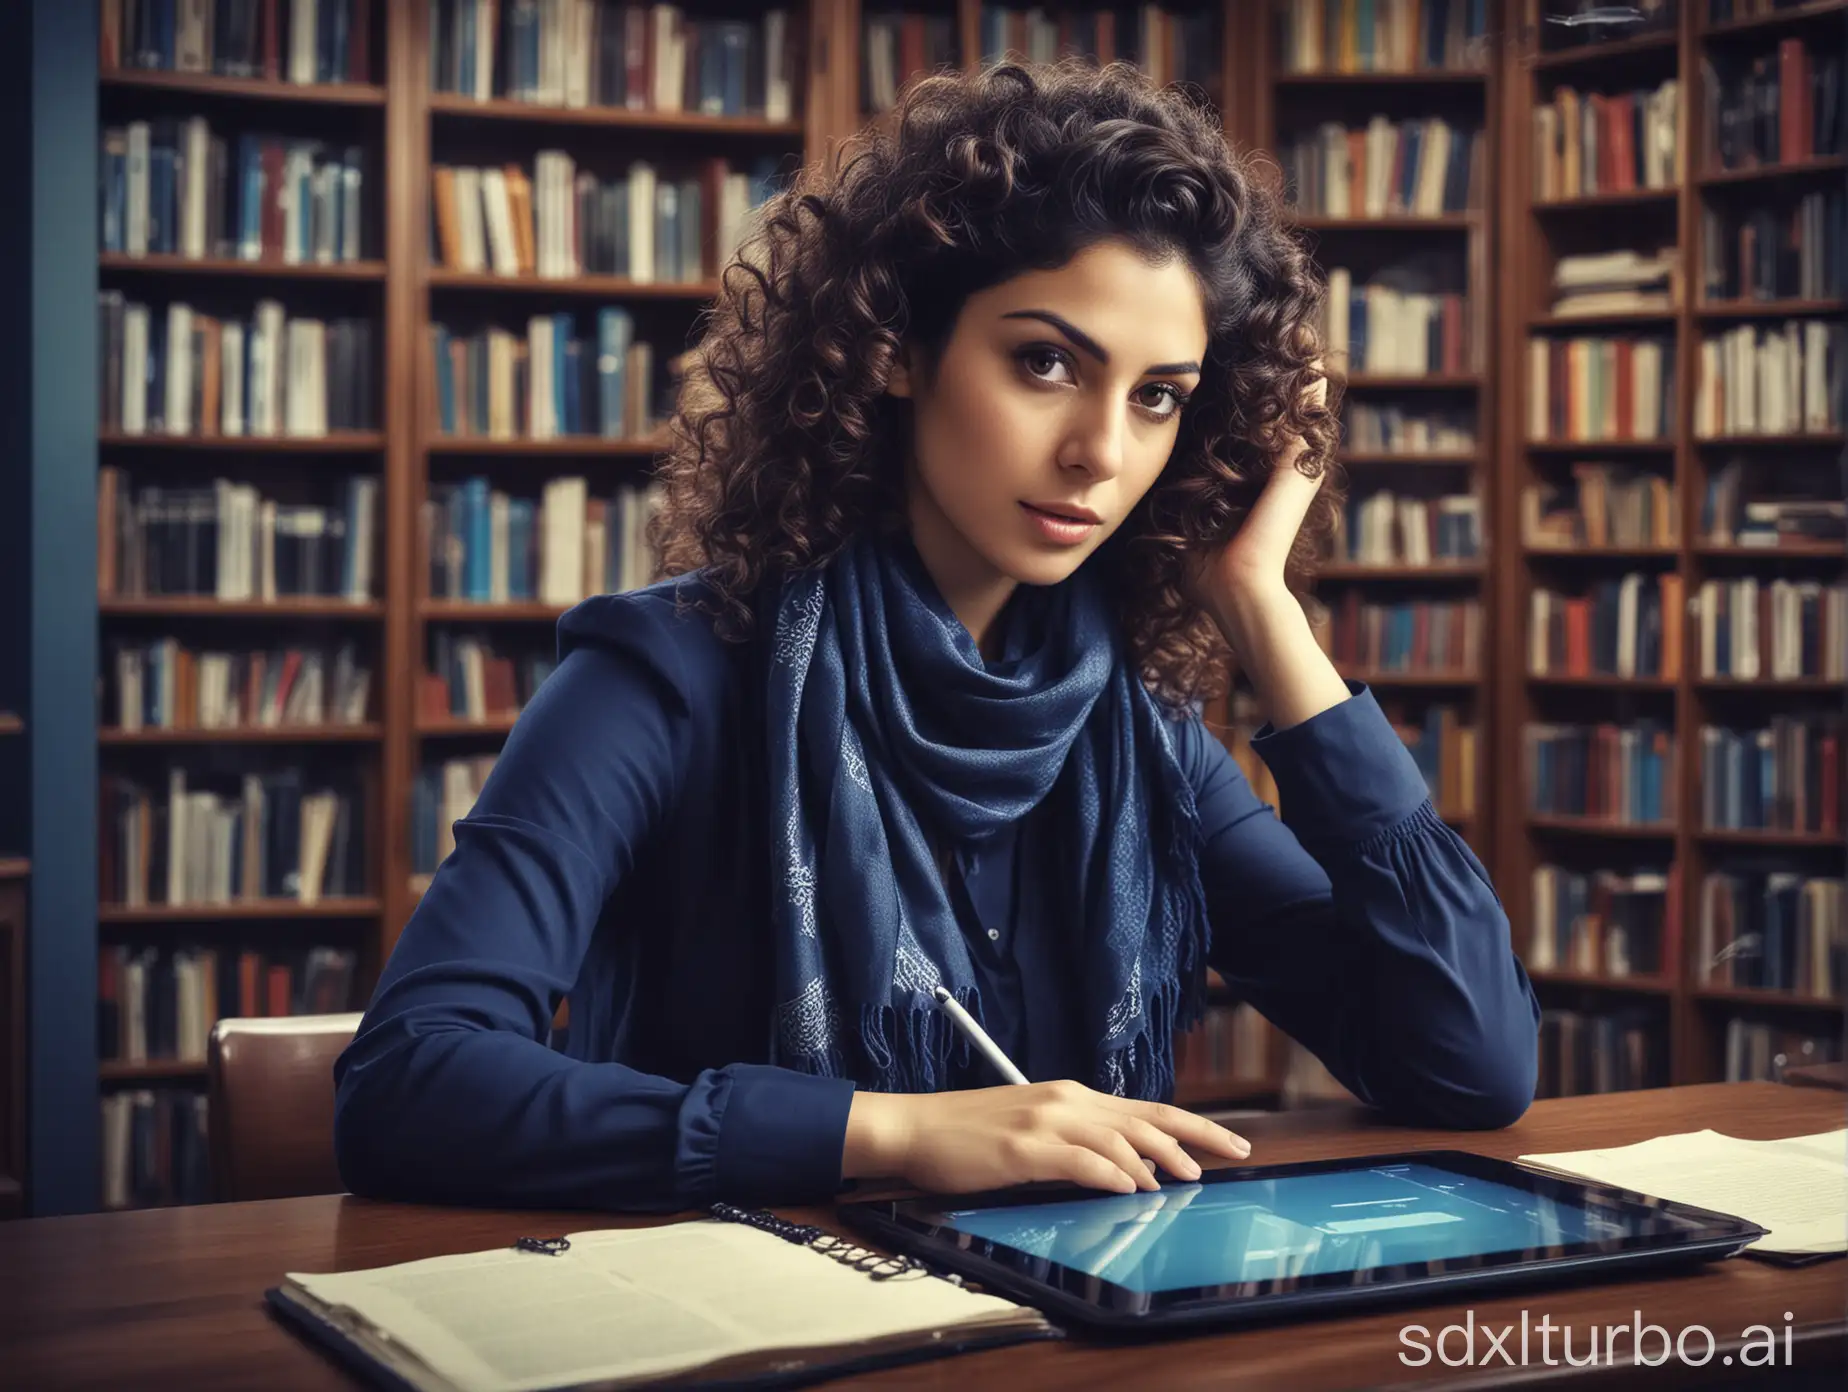 Most beautiful iranian 35 years old curly hair semi formal dark blue clothes and scarf woman sitting behind desk in library, the woman is working with a ((surface tablet)) ,the library is crowded and all peoples are busy stdying, artistic lighting, perfect shot, high contrast, vivide color, sharp foccous, detailed photo and face and texture